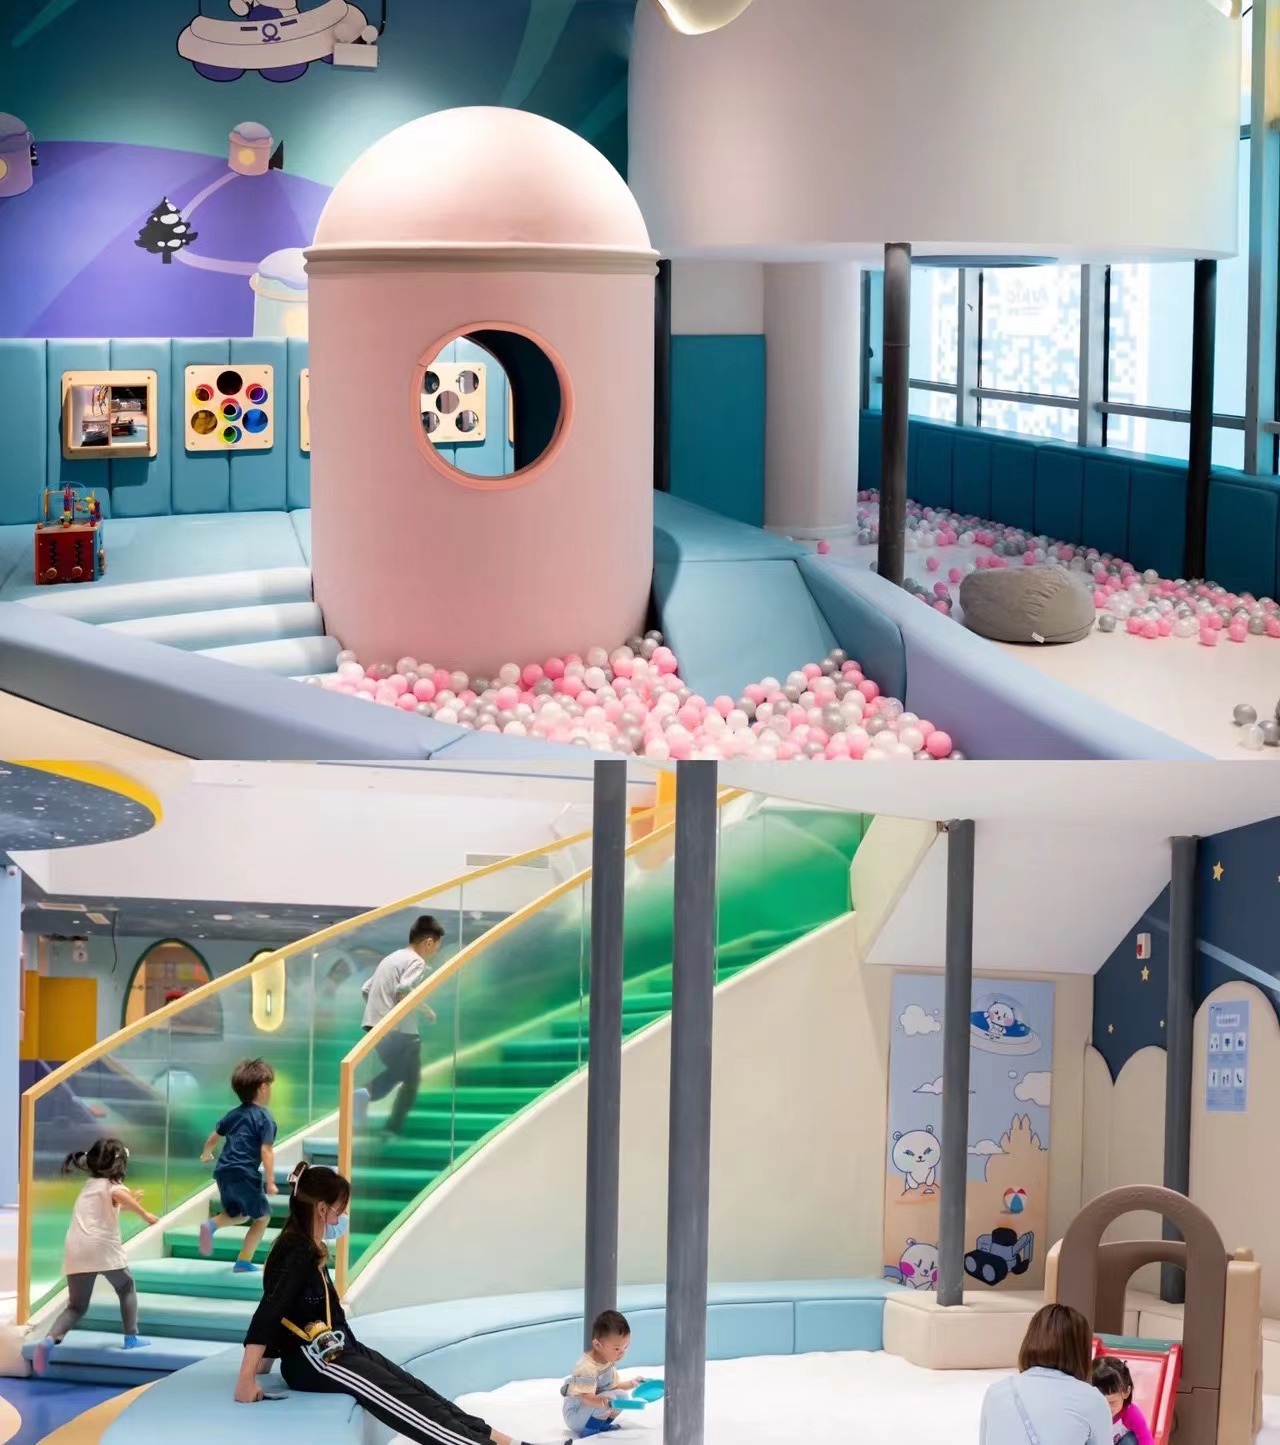 Methods to improve the customer satisfaction of the Indoor Playground